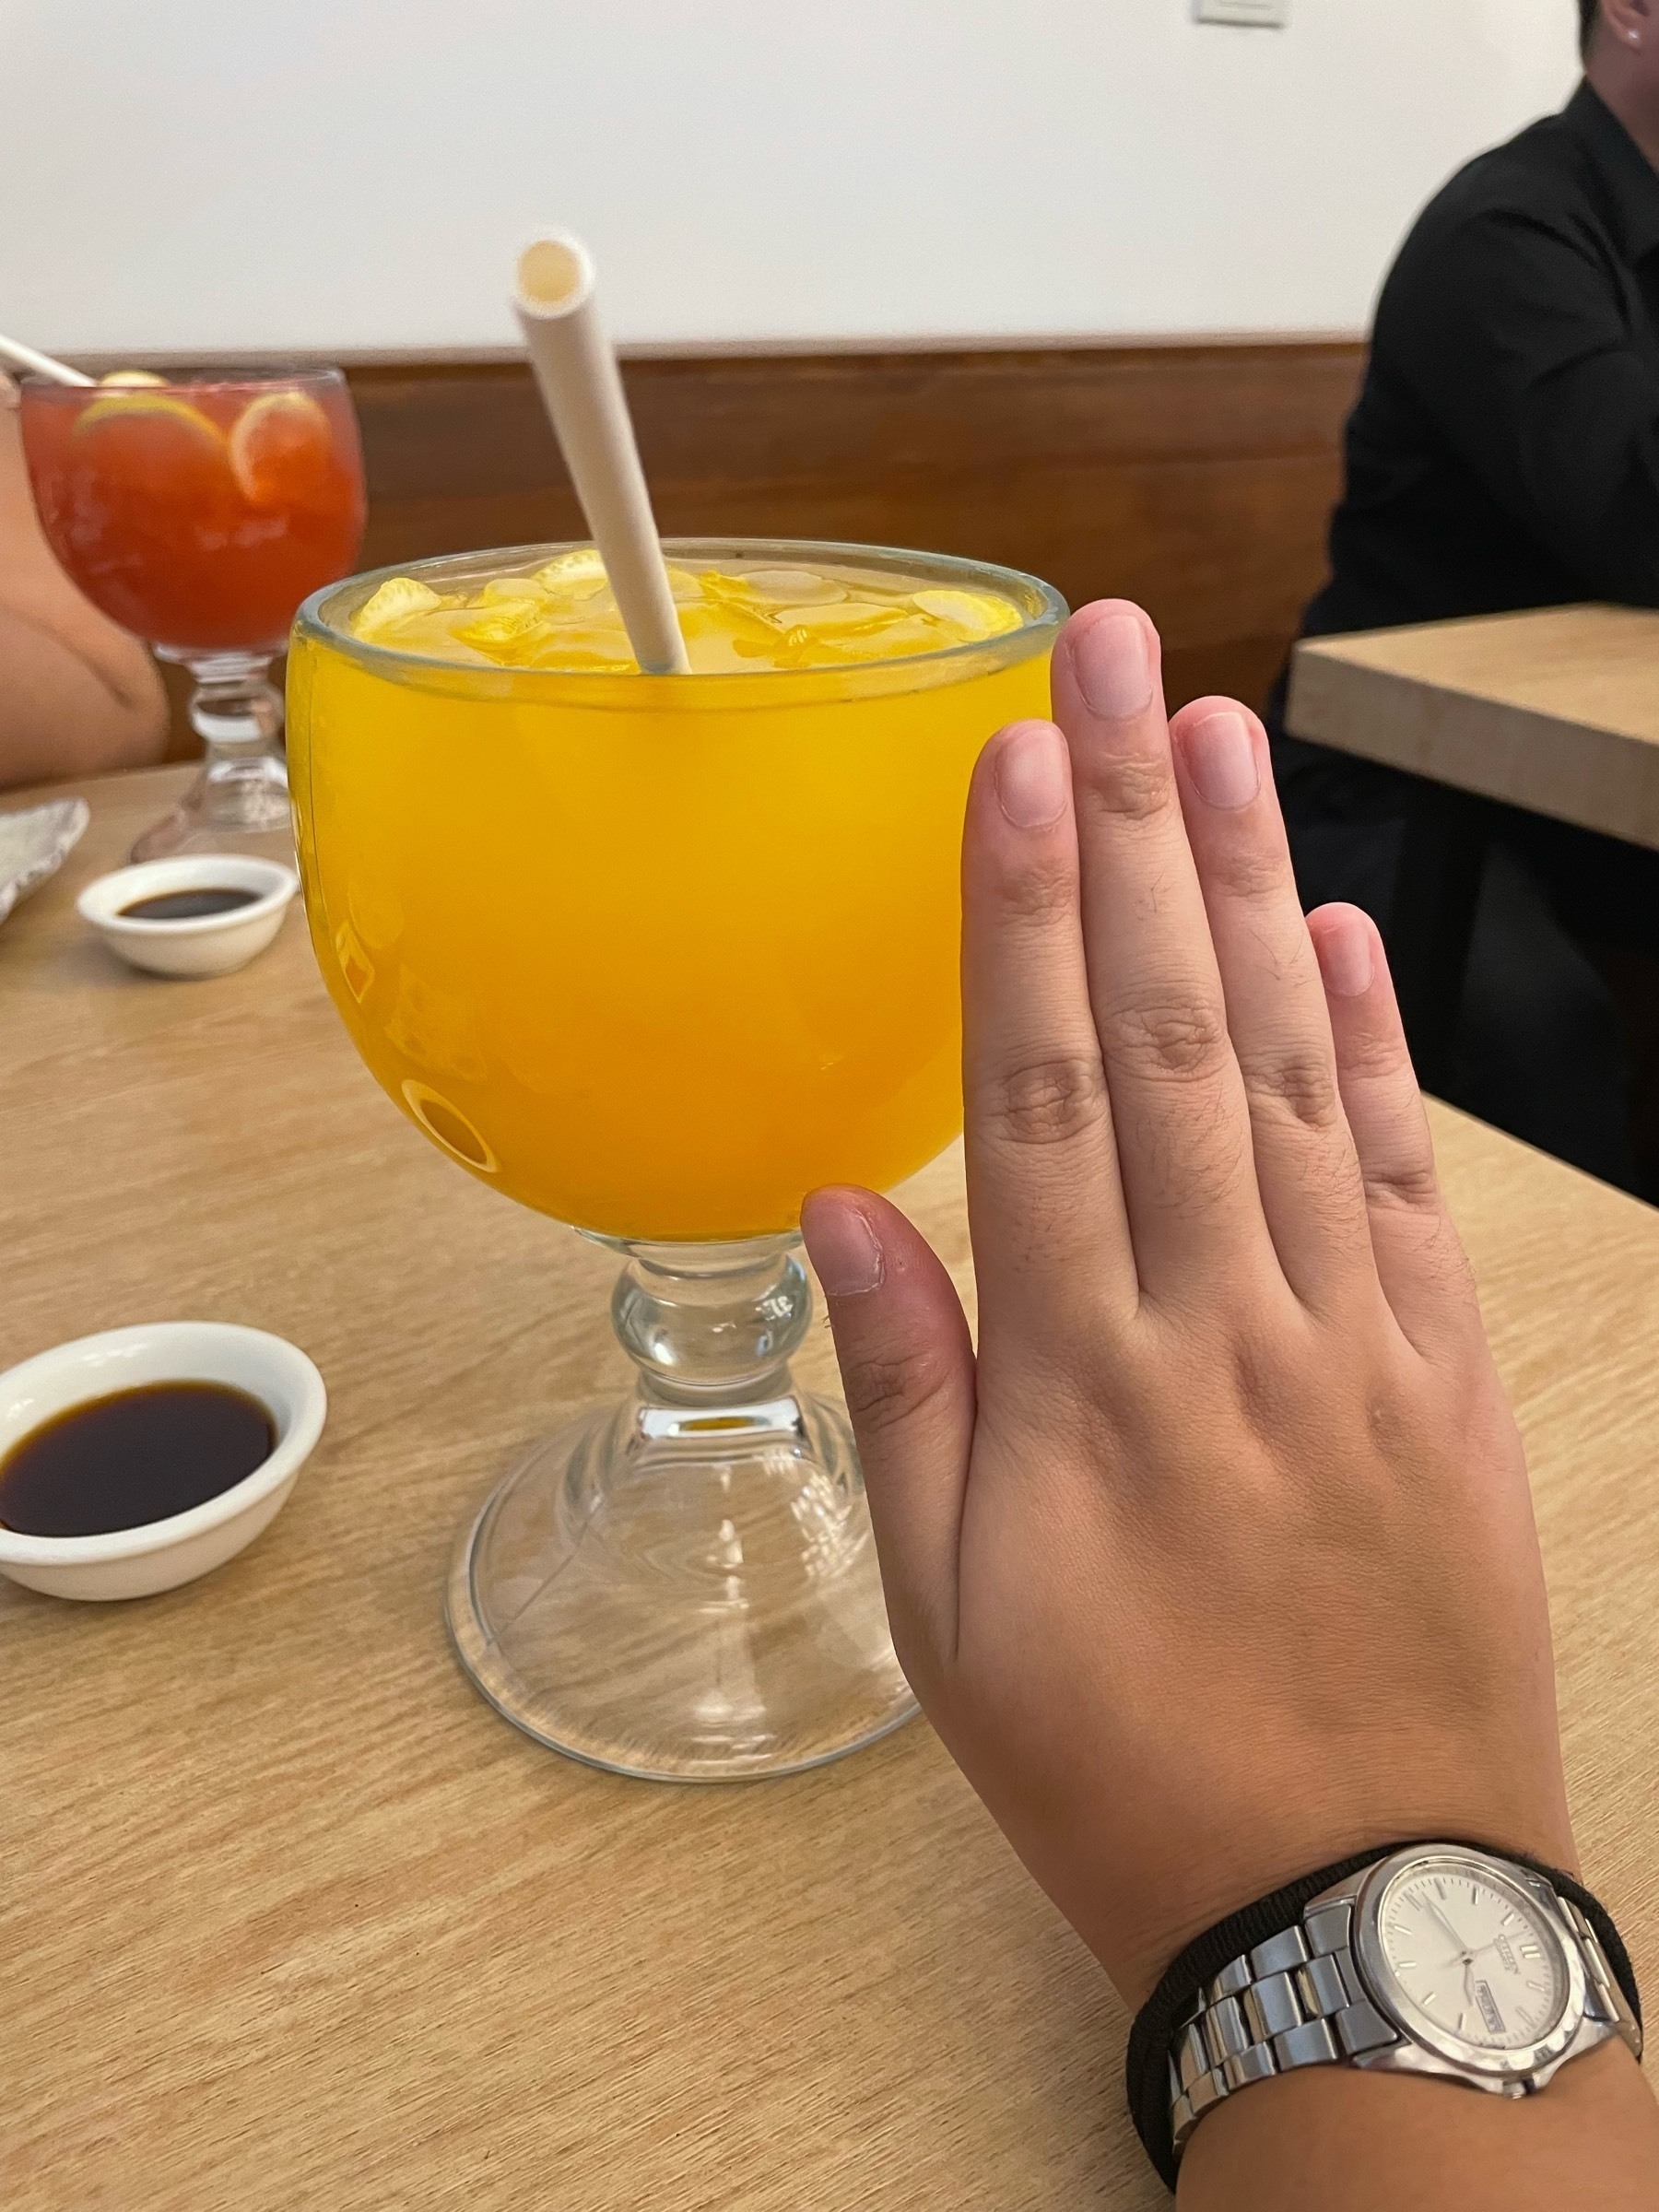 Chi's glass filled with mango juice, with a really big glass. The size is as big and wide as her hand, which is positioned right next to the glass for comparison. In the background, her companion's drink is also visible: a red drink, but Chi forgot what it was.